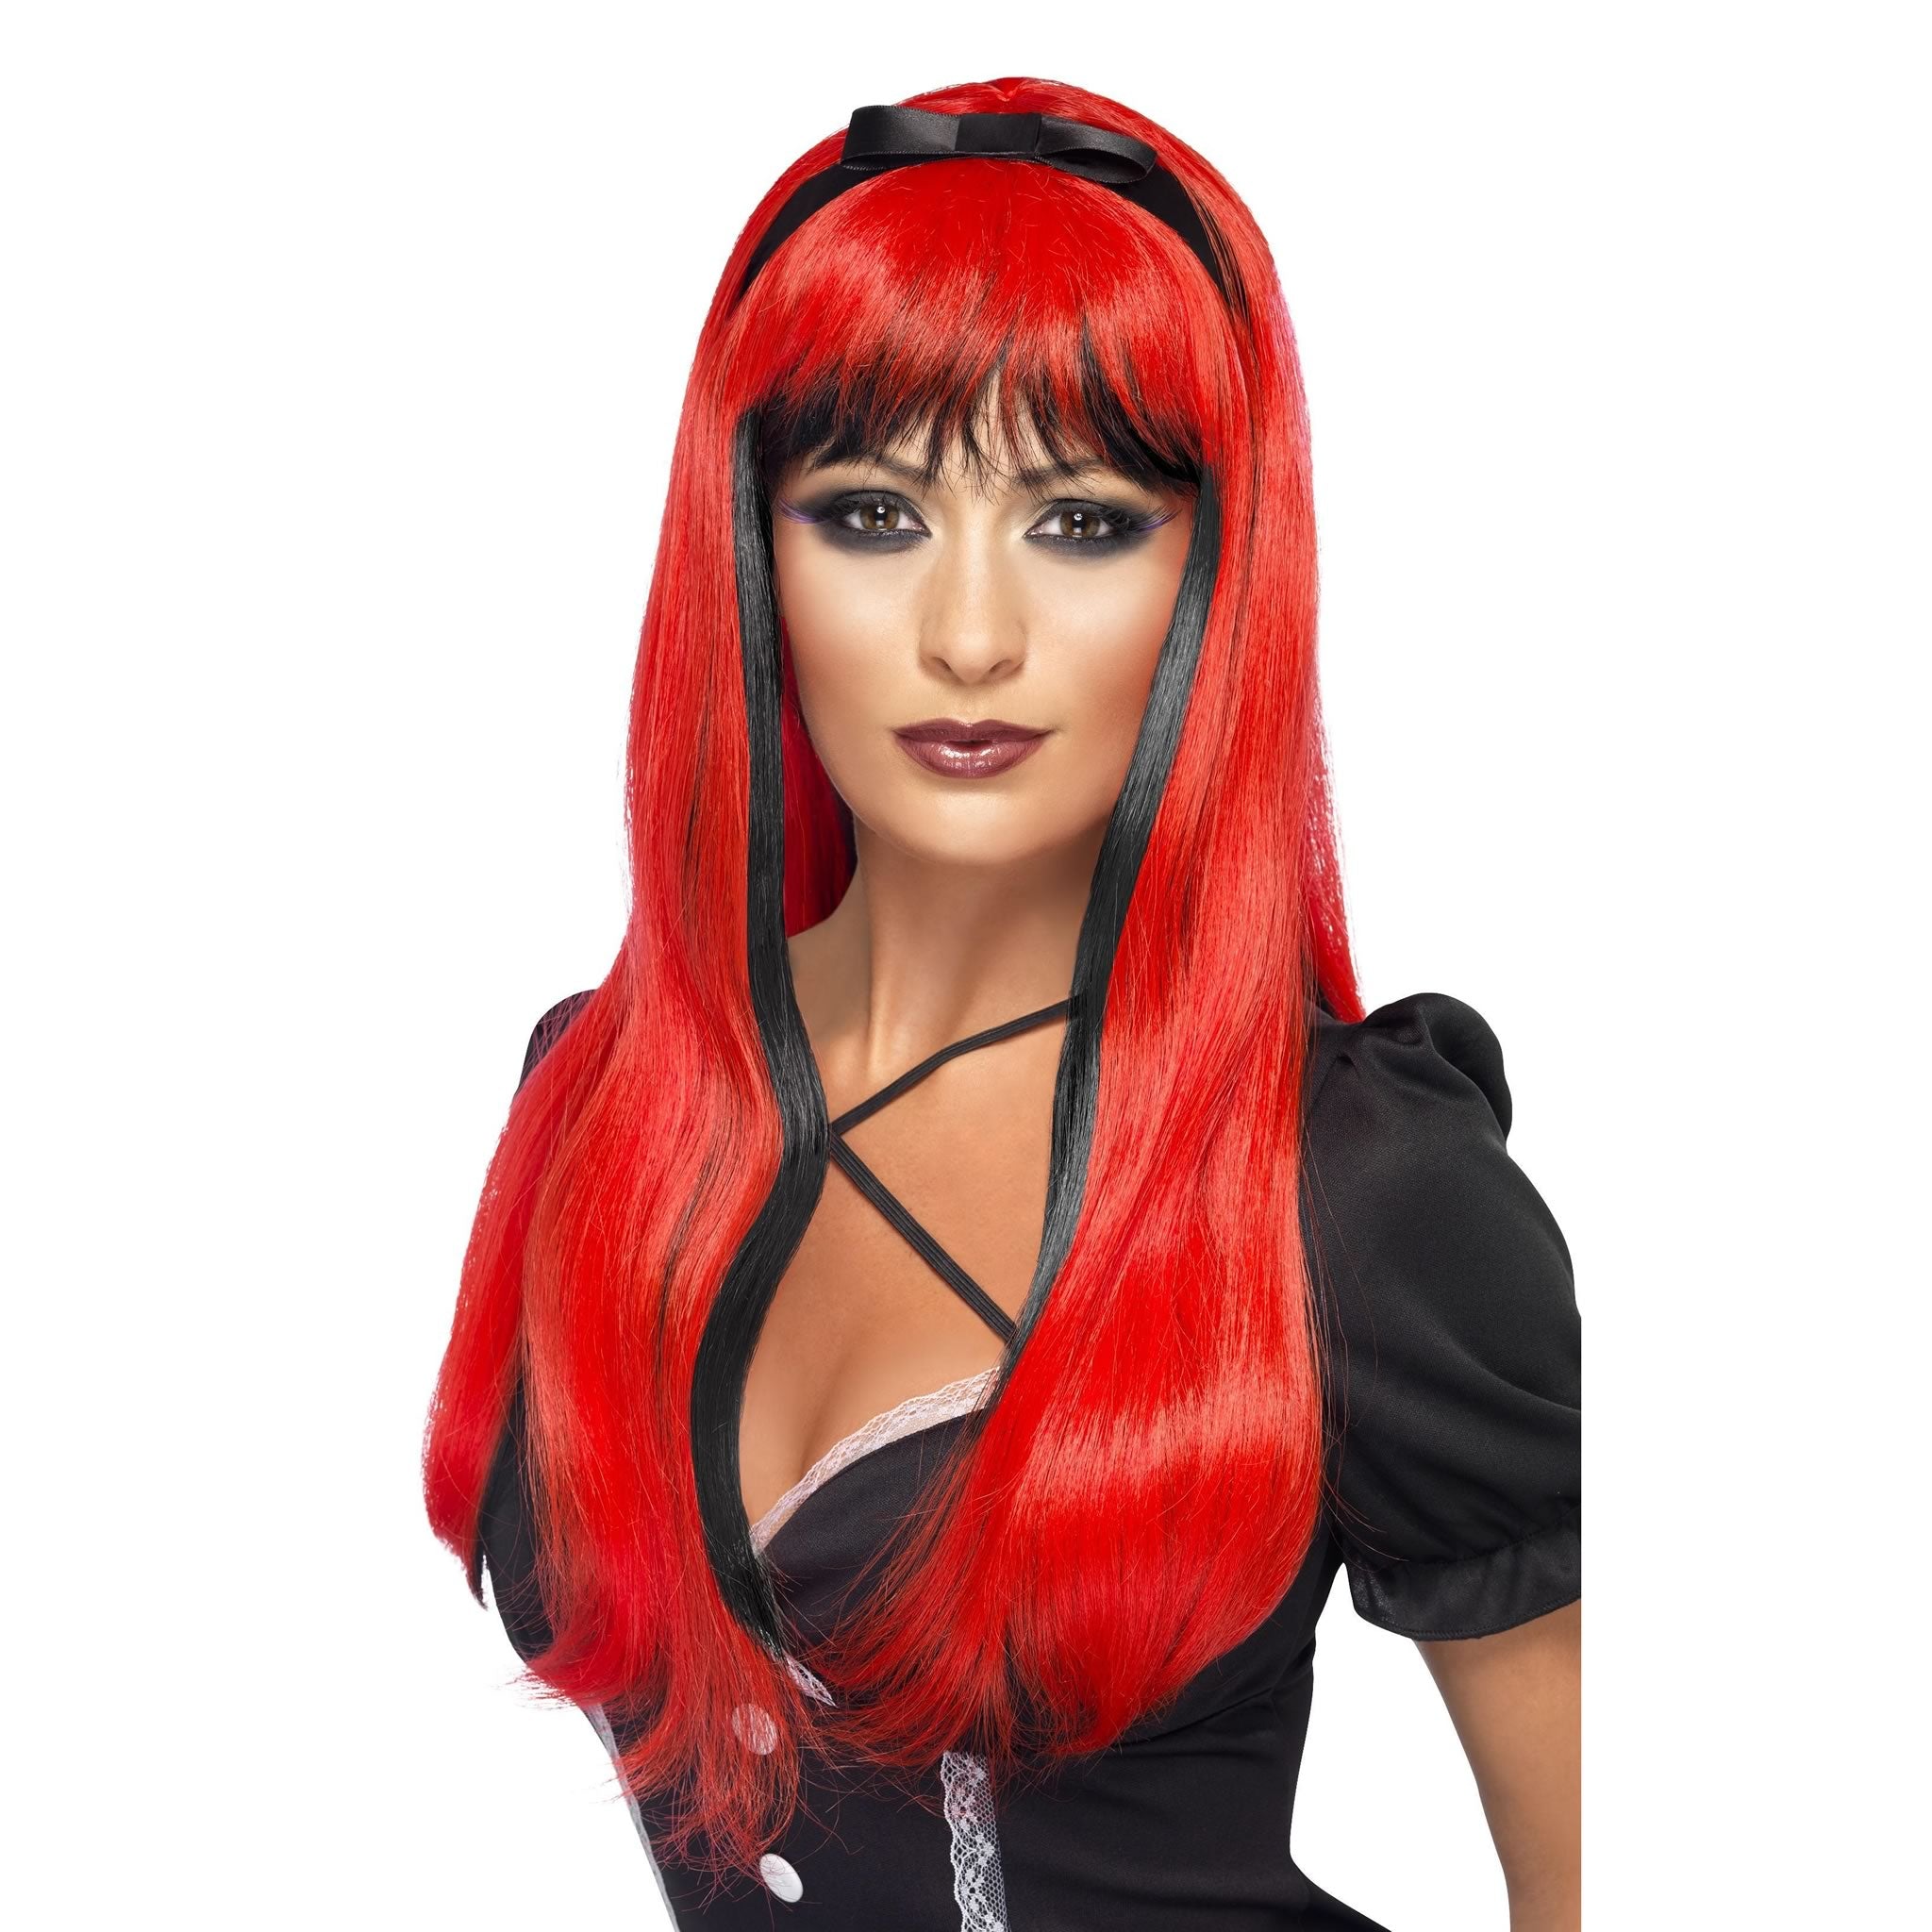 Long red over black Halloween wig